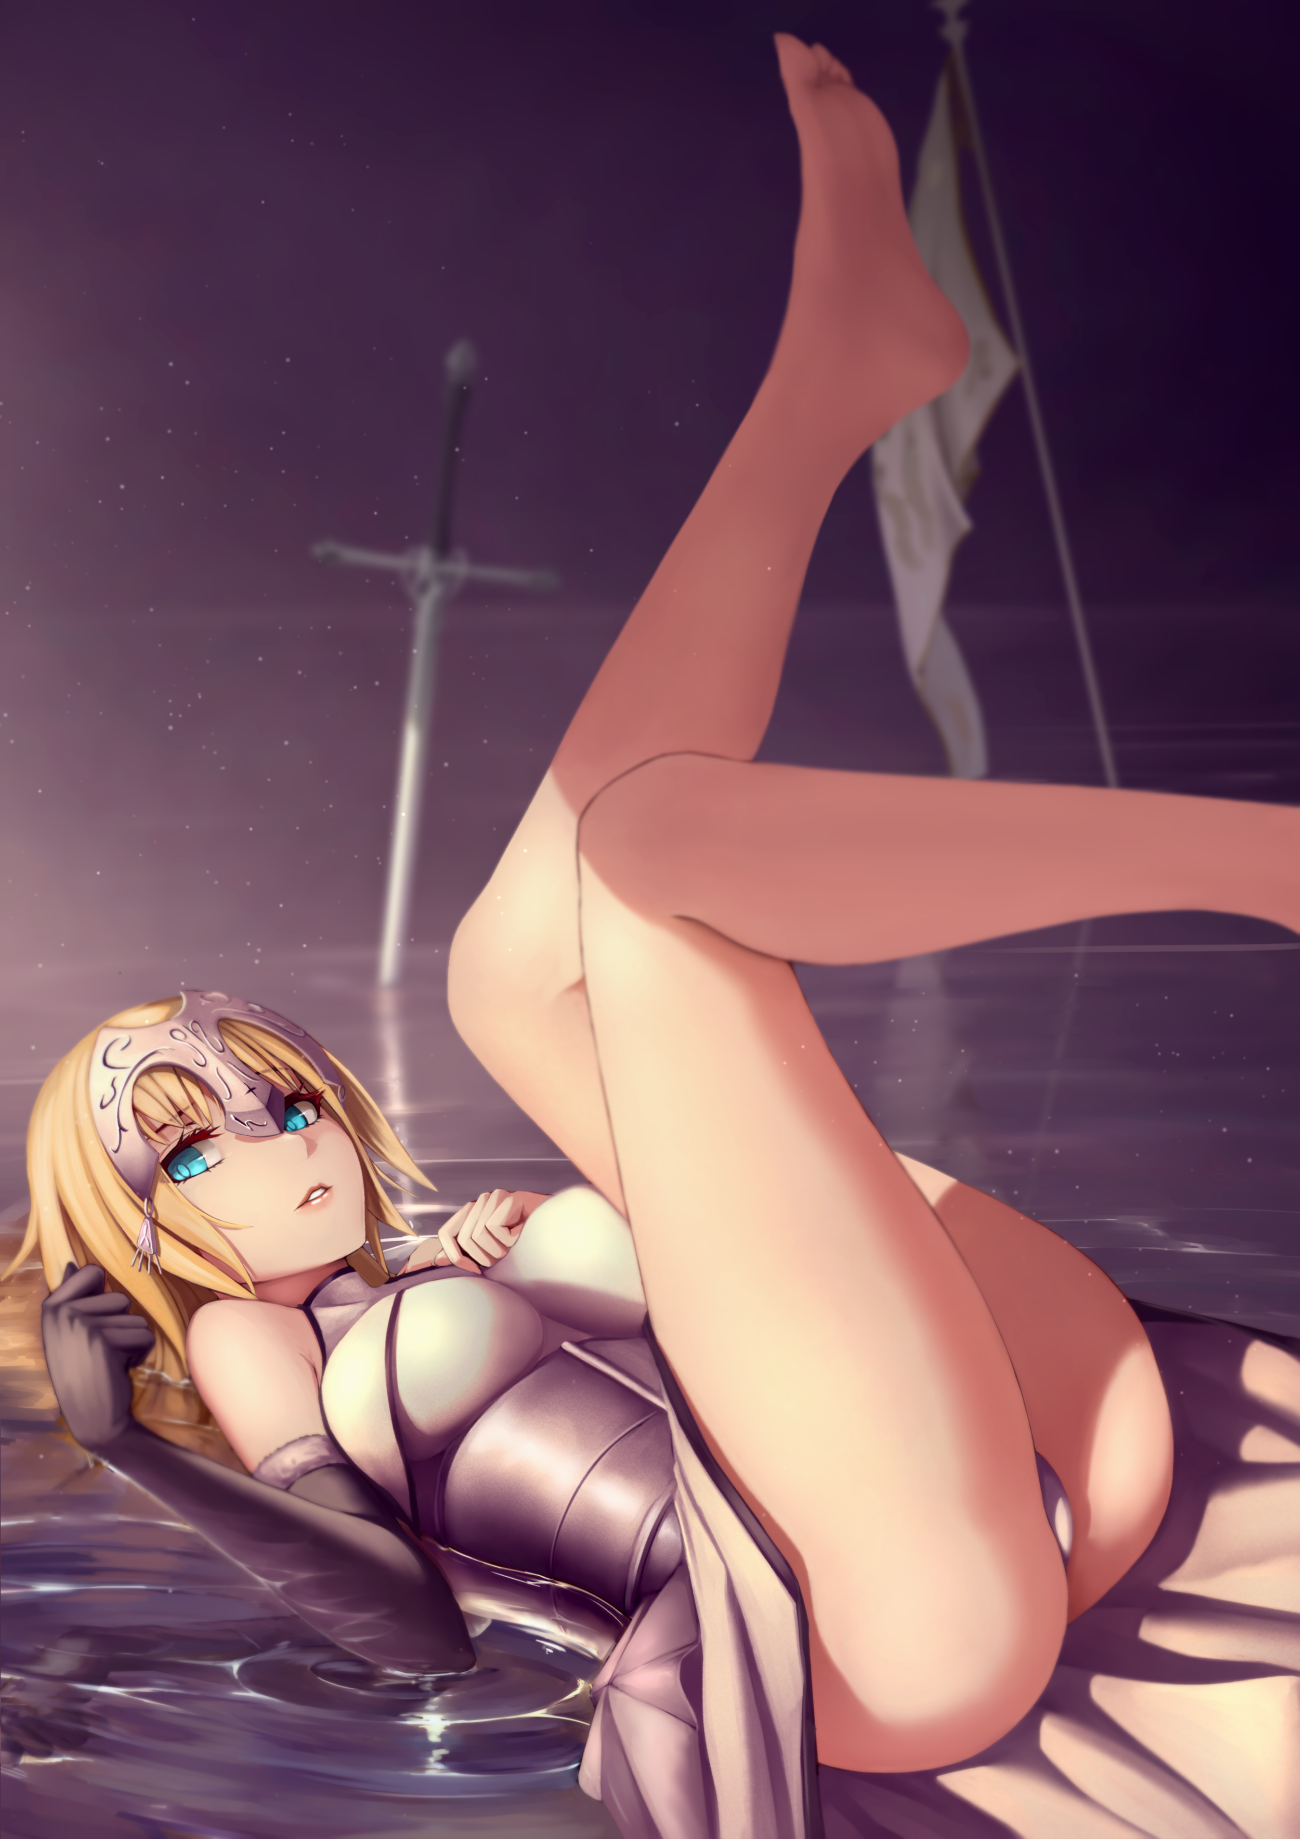 Anime 1300x1839 blue eyes panties water Fate/Grand Order Fate series Fate/Apocrypha  long hair blonde looking at viewer armor legs up sword anime anime girls Jeanne d'Arc (Fate) Shijiu ass barefoot aqua eyes boobs lying on back fantasy art fantasy girl